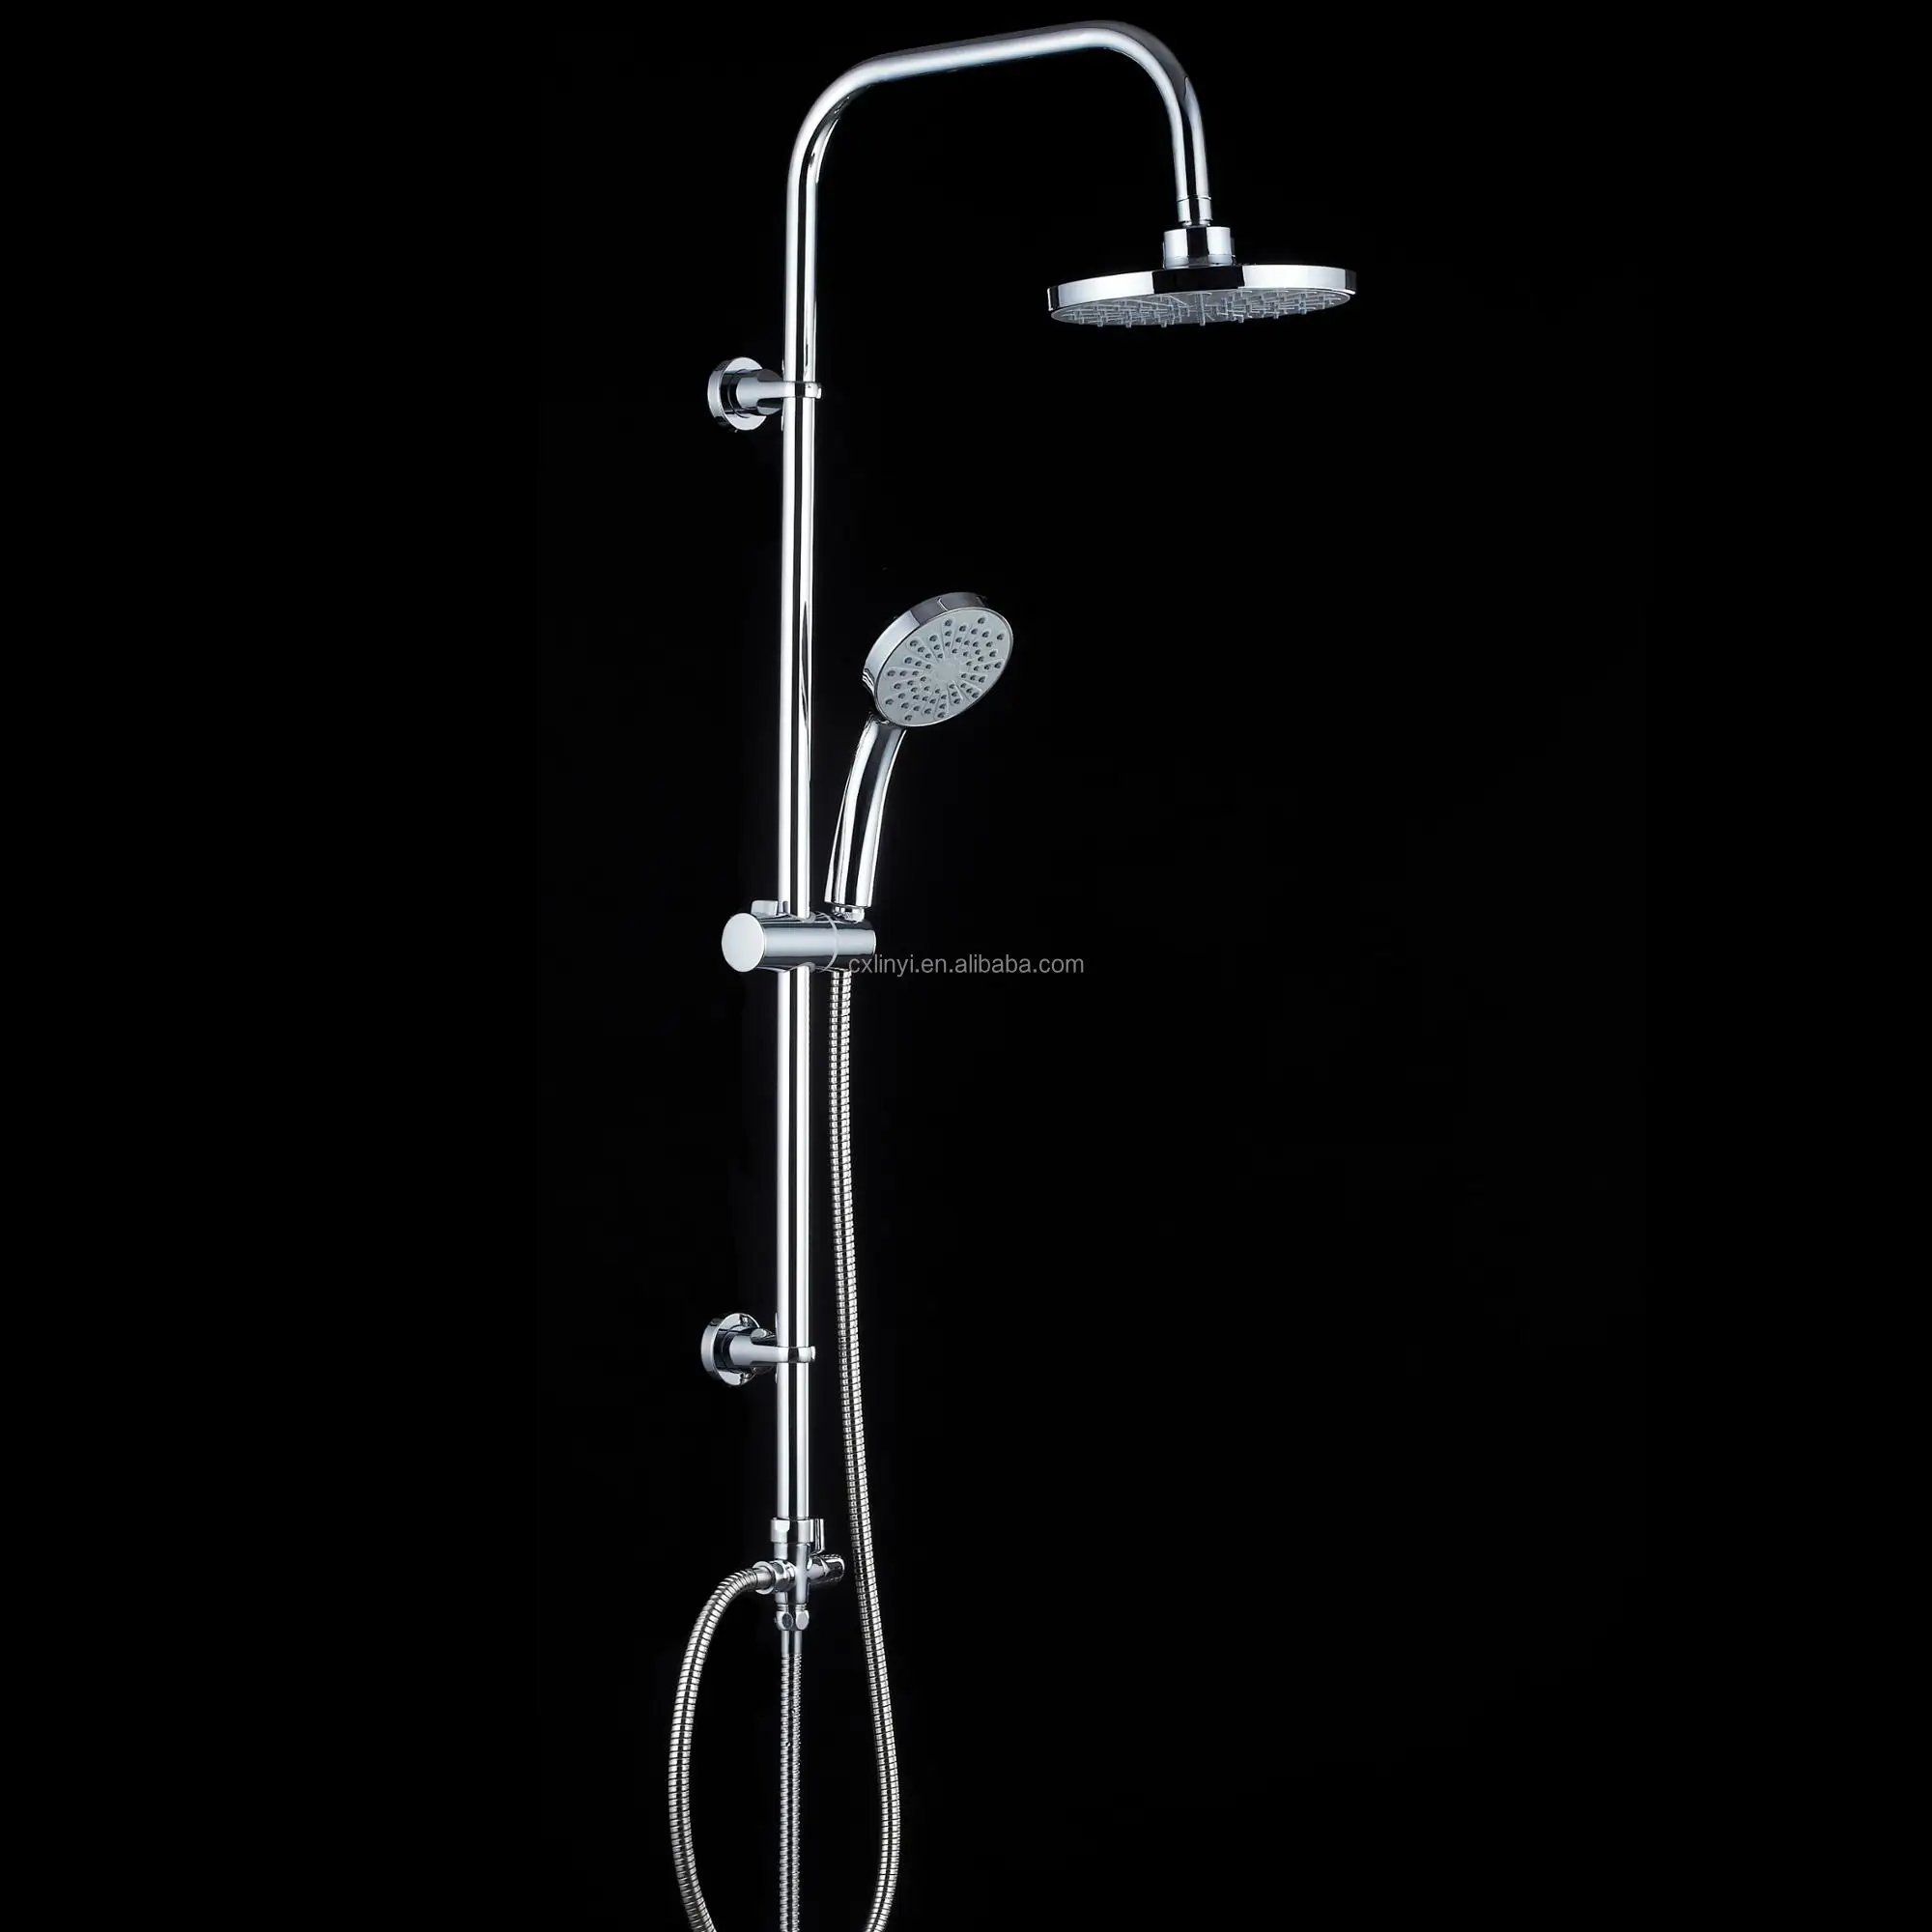 Shower Set Stainless Steel Bathroom Faucet Accessories Shower Column Panel With Shower System Buy Shower Panel Sistem Mandi Mandi Set Stainless Steel Product On Alibaba Com